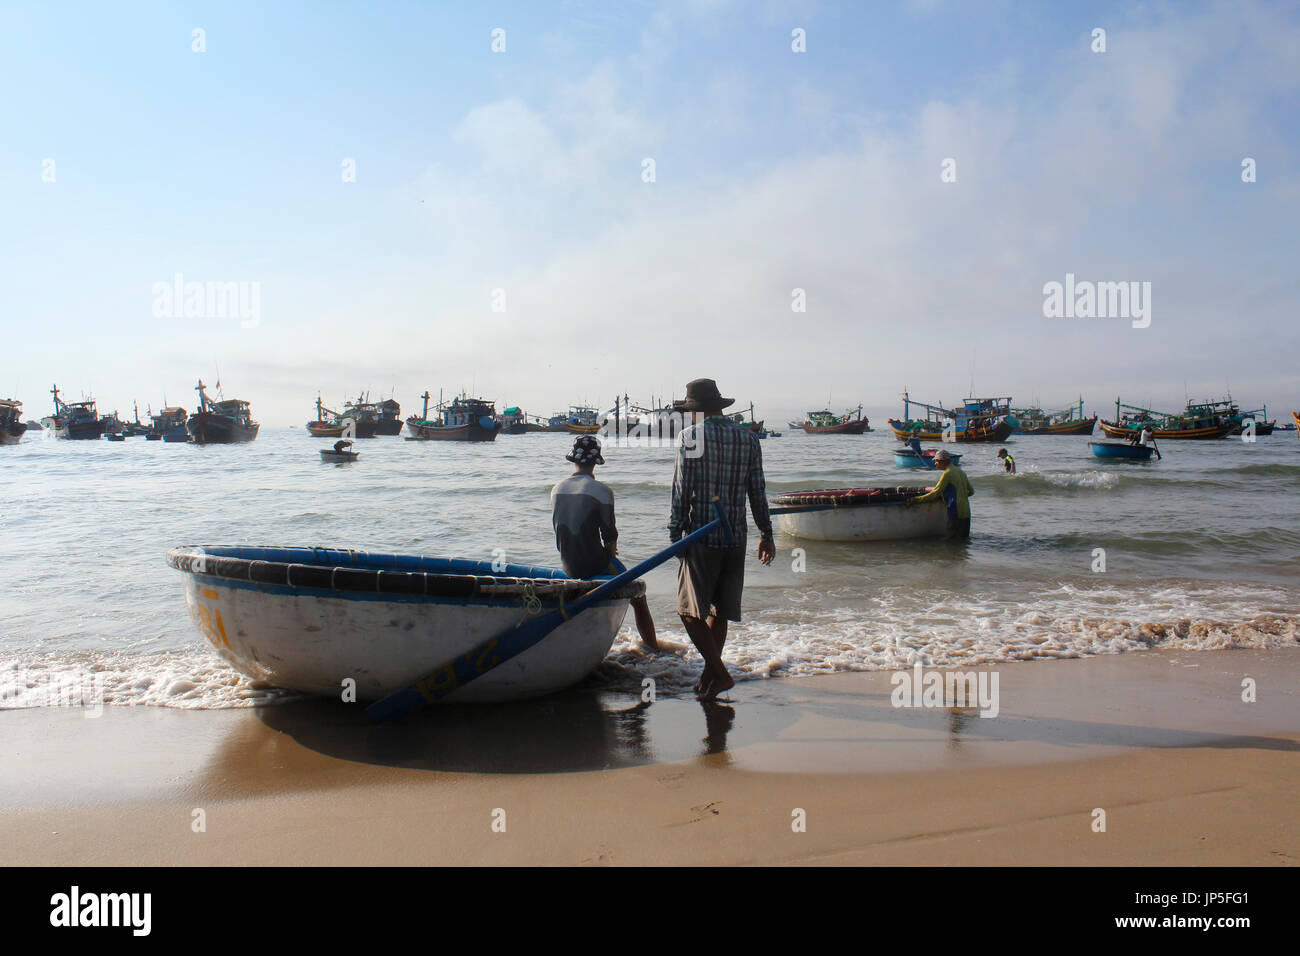 Mui Ne, Vietnam - June 27, 2017: Crowded scene of daily early morning fish market on beach with the fishermen resting on round boat Stock Photo